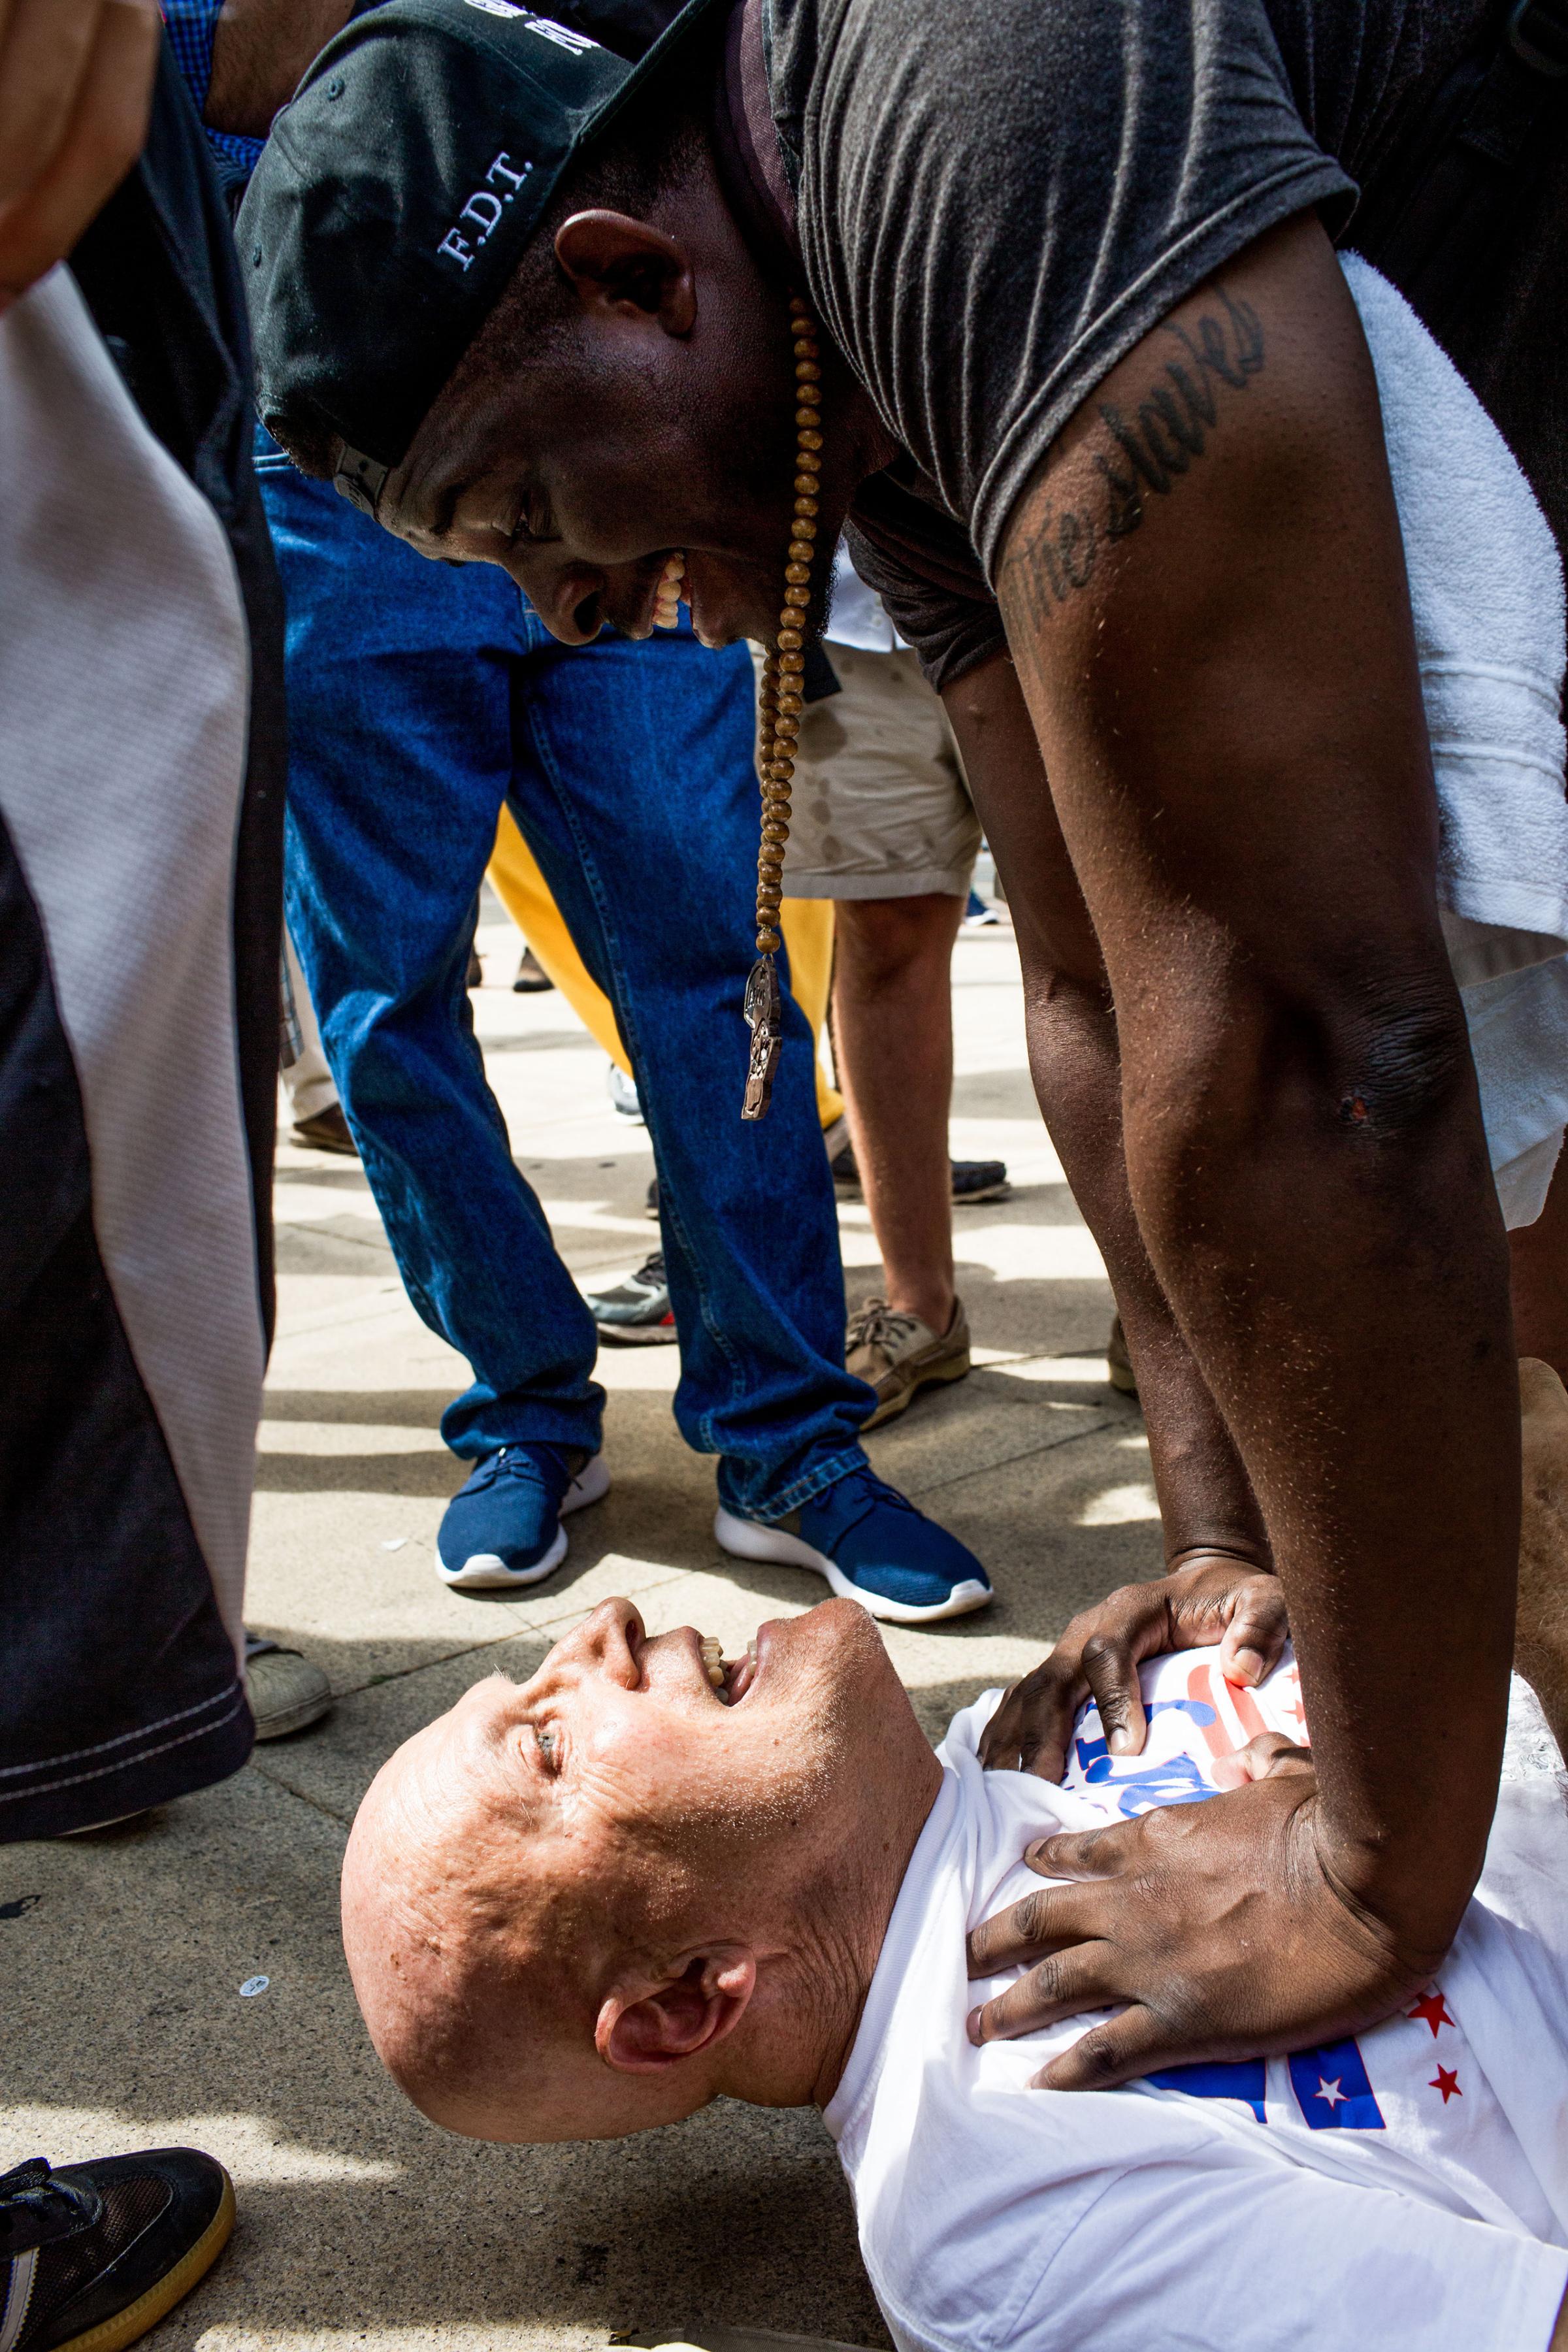 A man accused of assaulting a protestor is held down by another protestor until police arrive. Protesters convened at City Hall in Philadelphia on Tuesday afternoon to watch speaker Jill Stein and protest theDemocratic National Convention at the Wells Fargo Center on July 26, 2016.